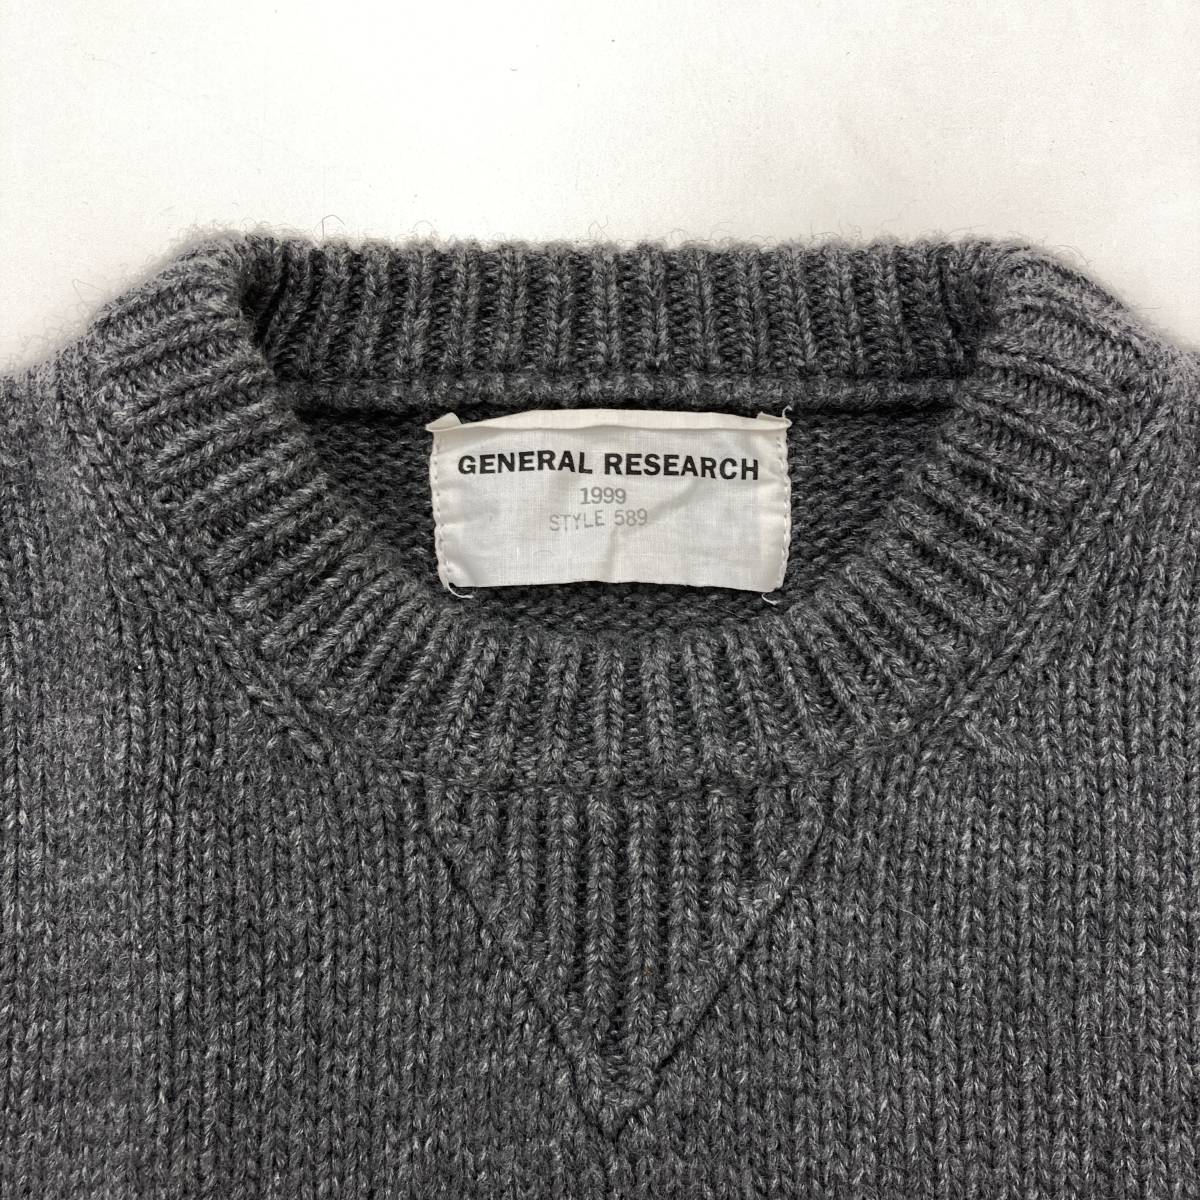 GENERAL RESEARCH 1999 STYLE.589 cashmere knitted sweater border gray M size General Research 90s VINTAGE archive 4010173